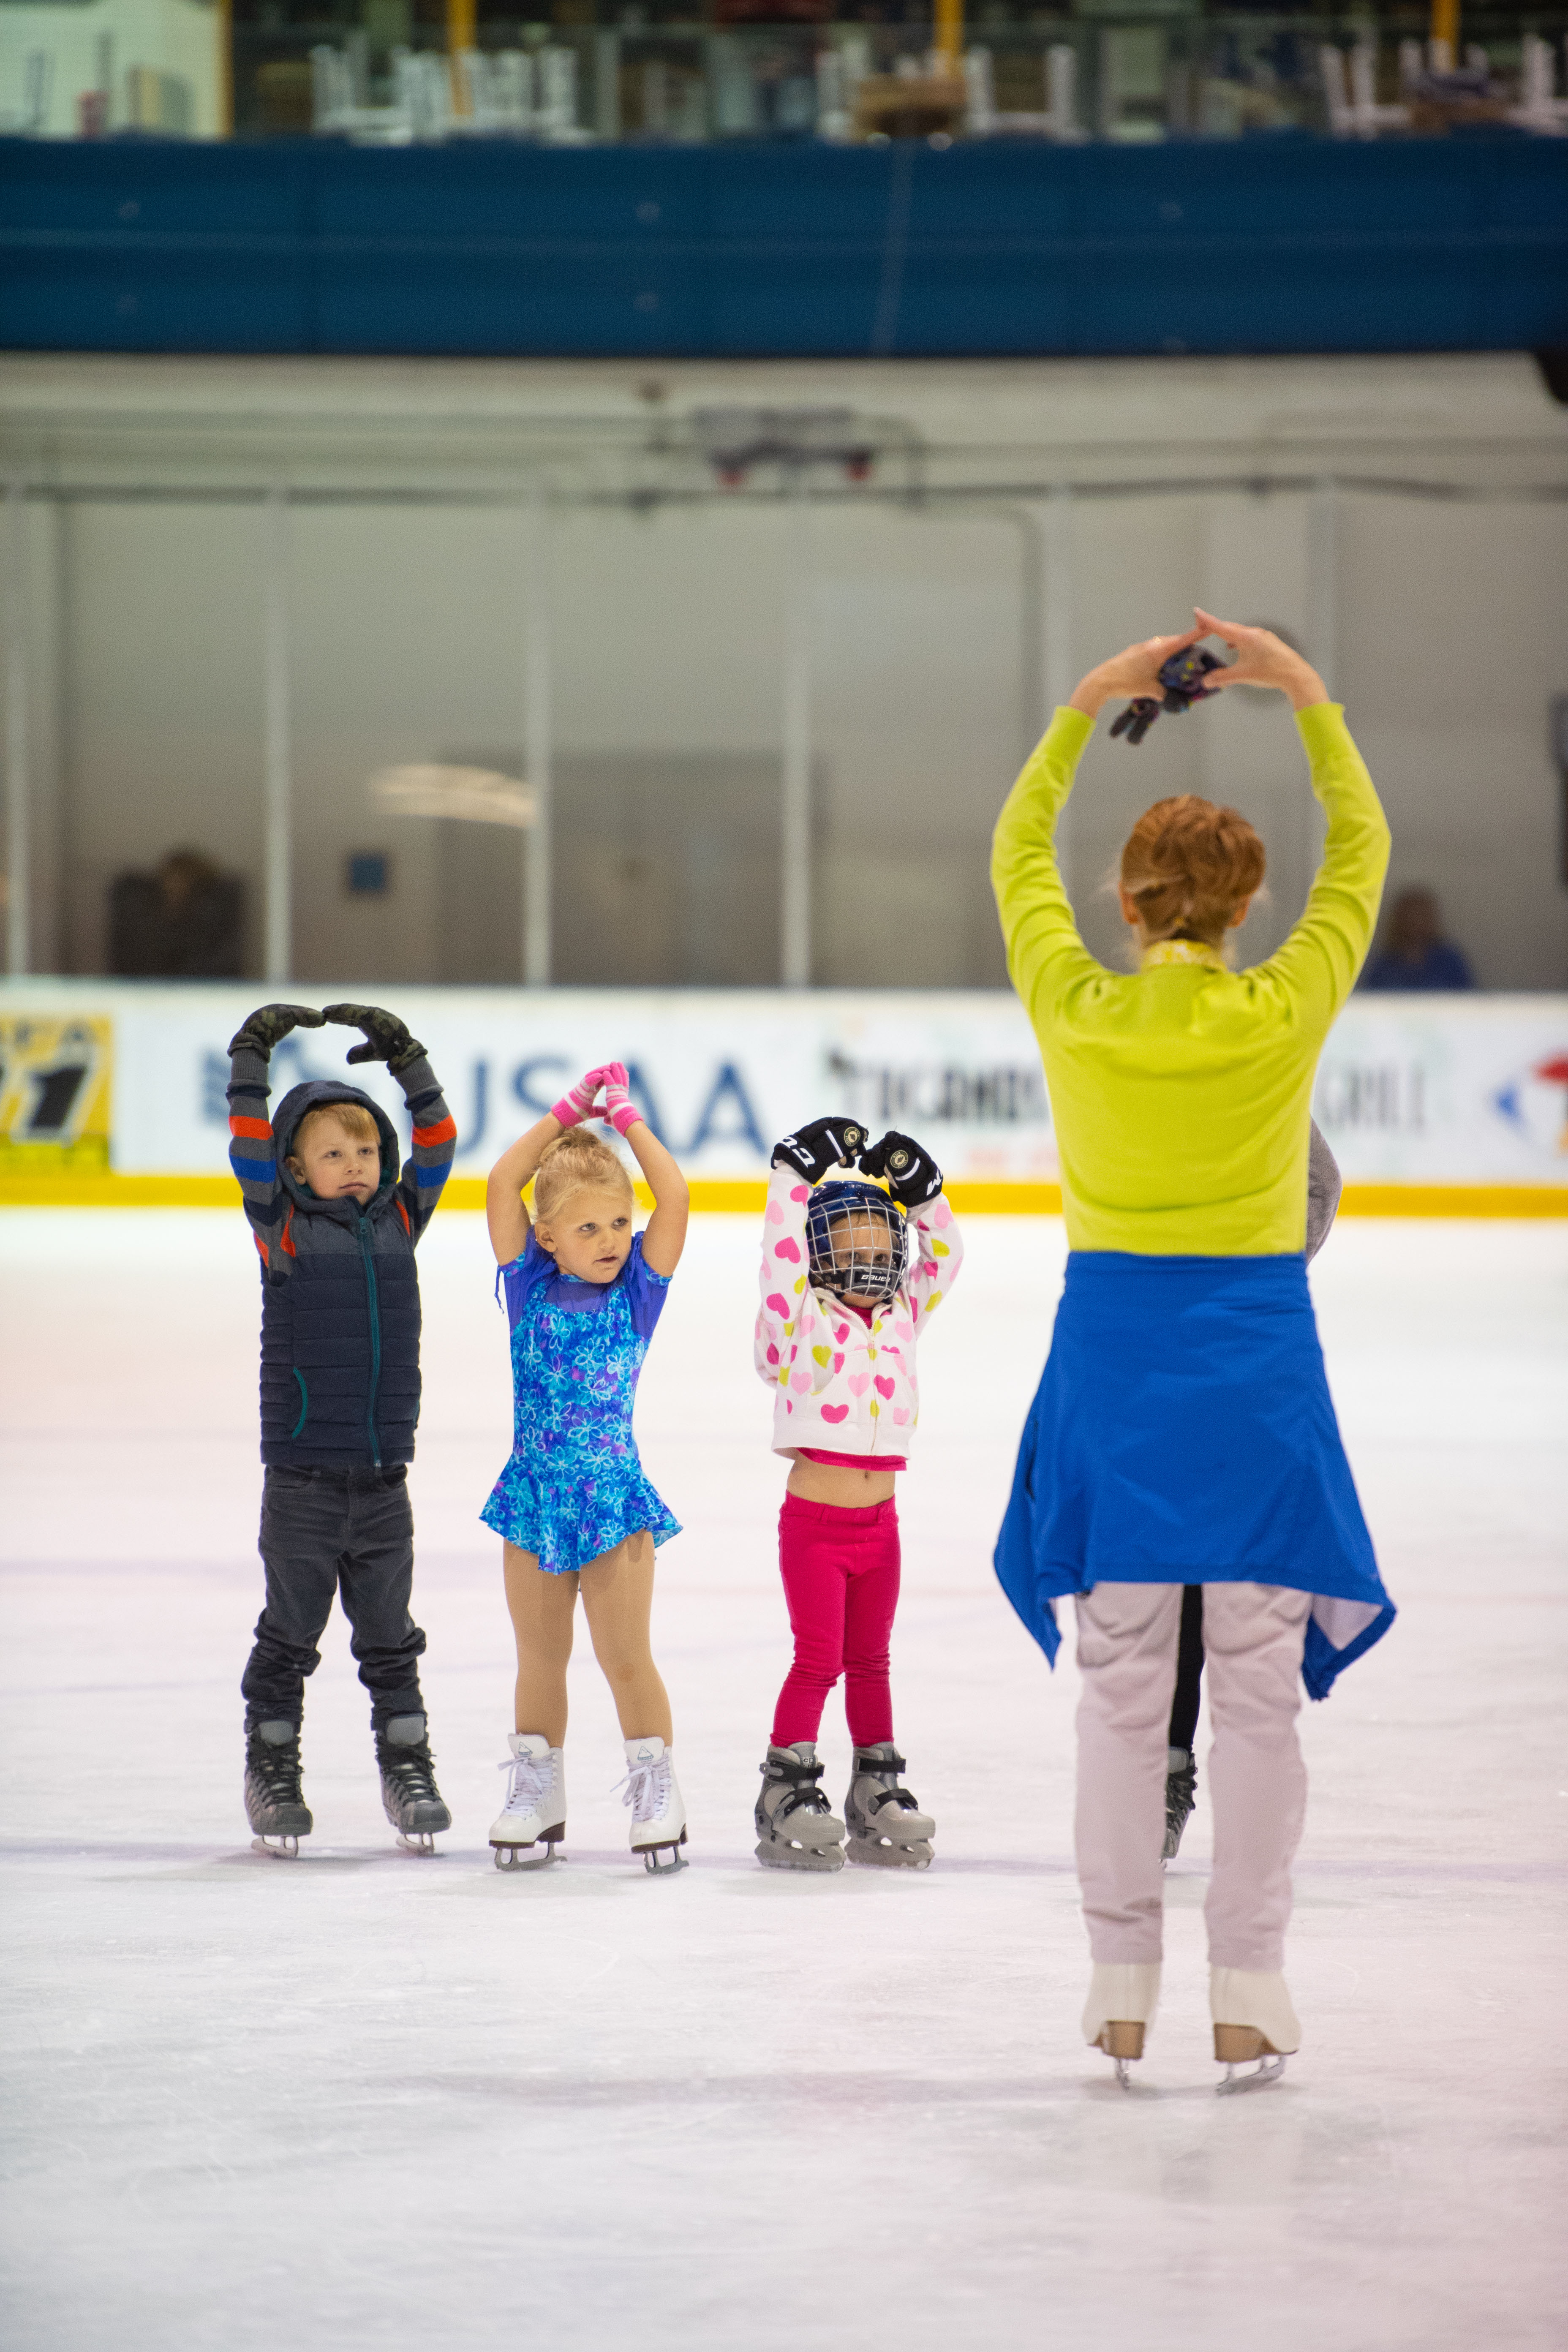 Preschool age skaters in a lesson with a coach